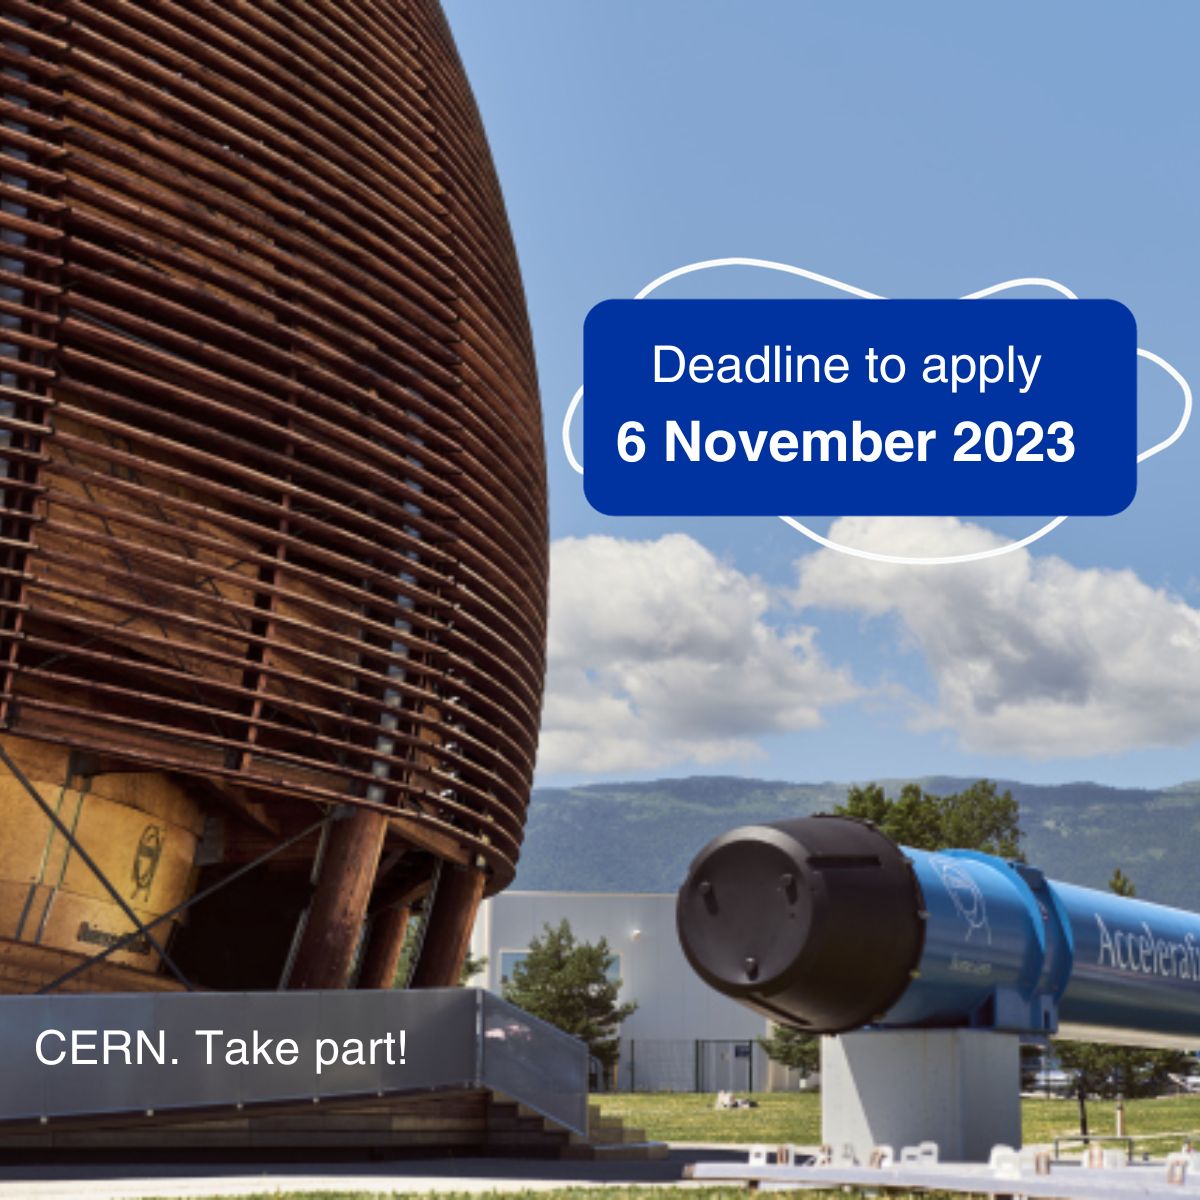 Last call for university students to apply for a placement year / internship at CERN. ⏱️ Don’t miss the chance! Learn more and apply: cern.ch/apply-today Deadline to submit your application: 06.11.2023 CERN. Take Part! #CERN